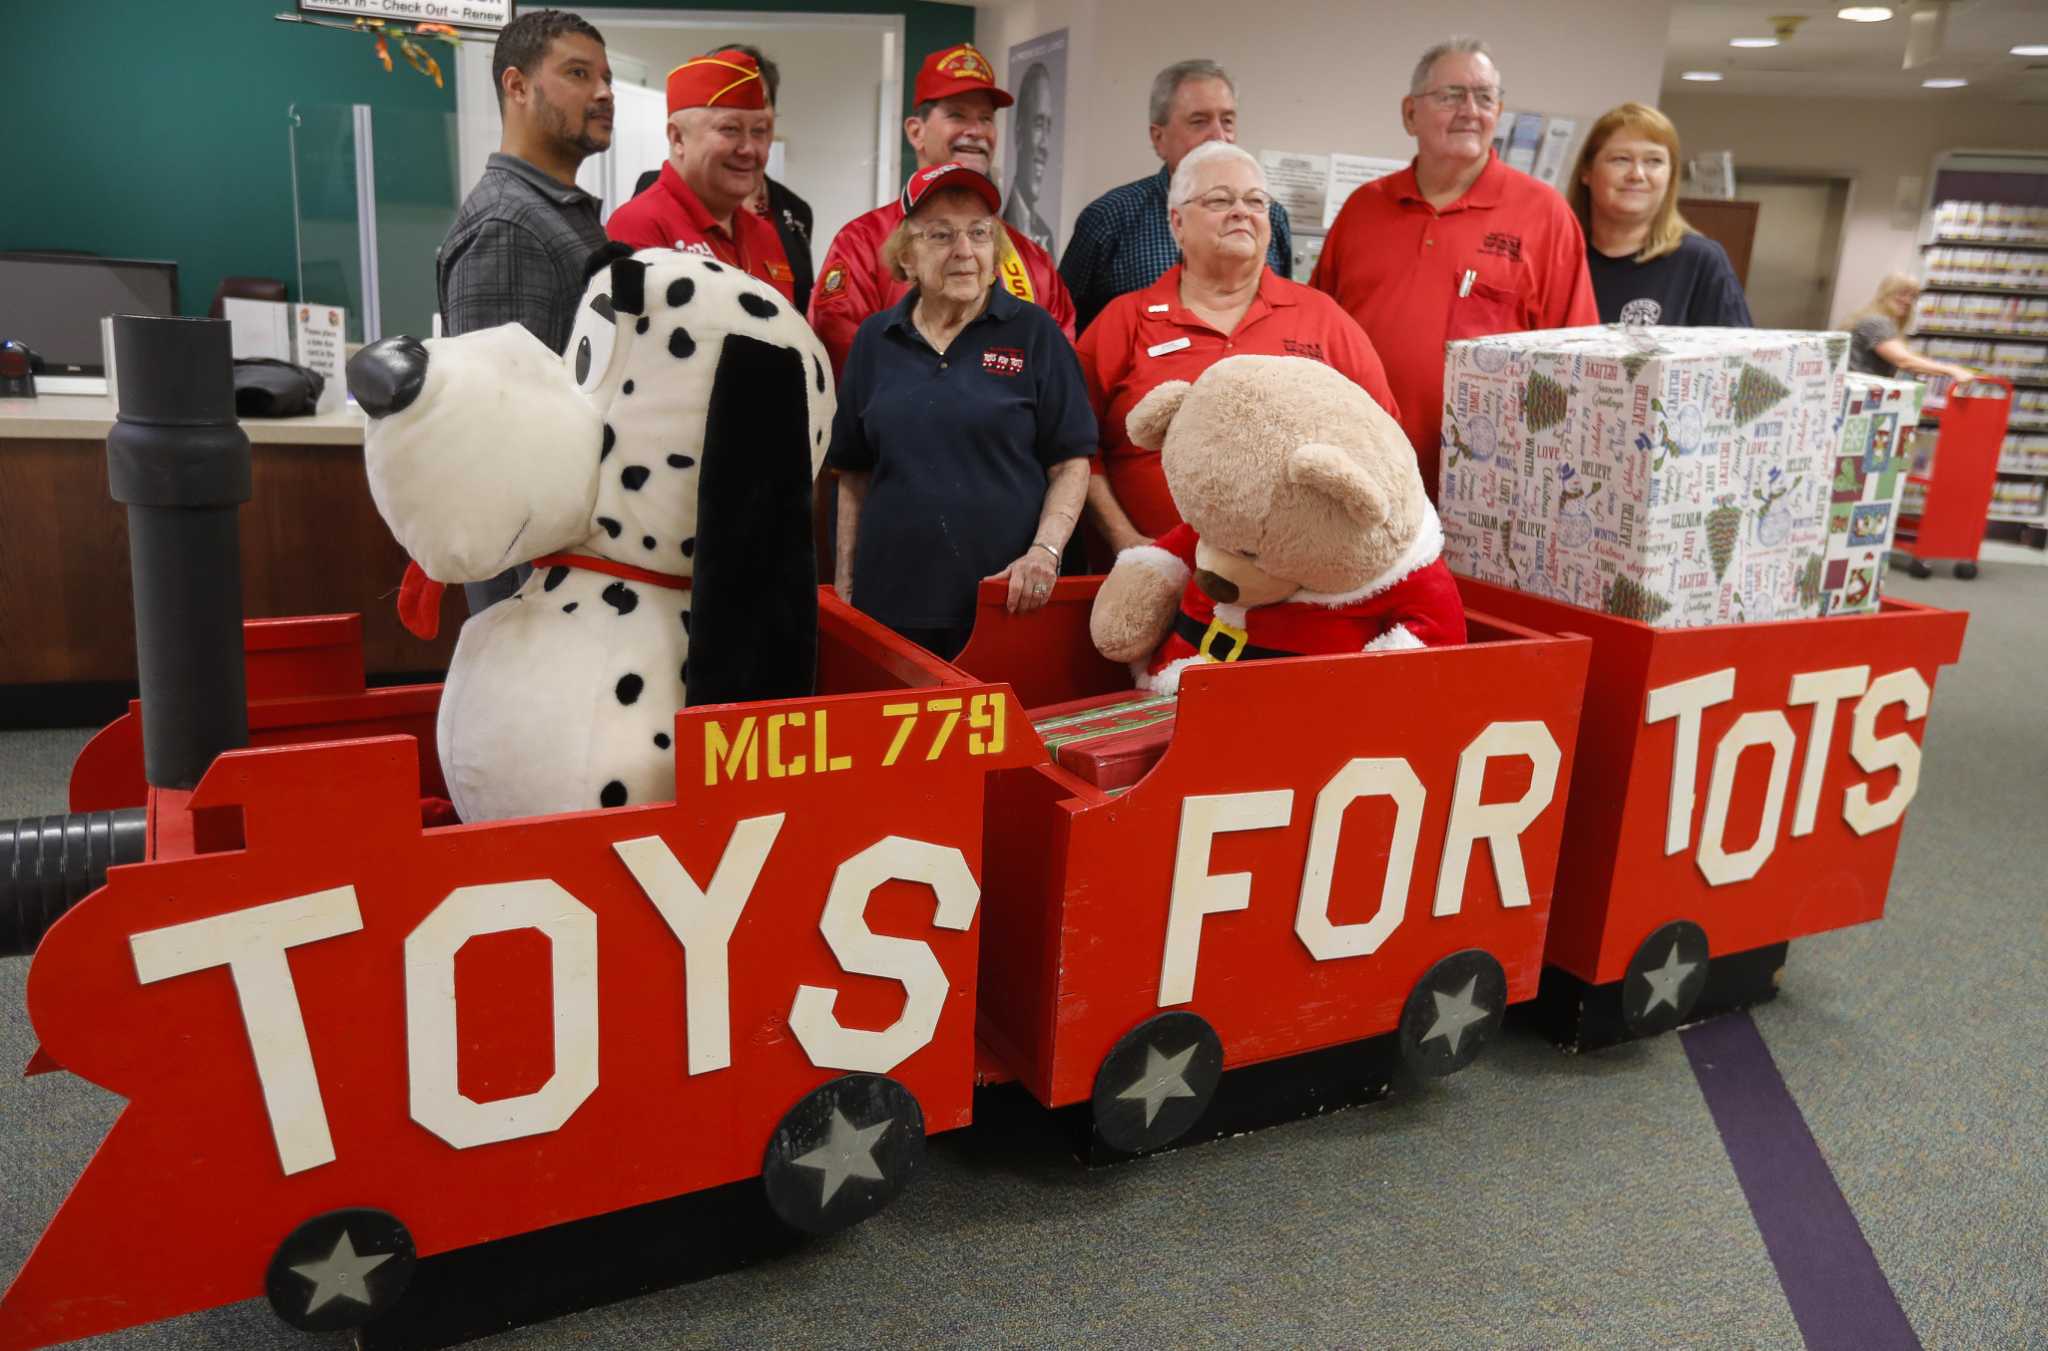 What Documents Do You Need For Toys For Tots